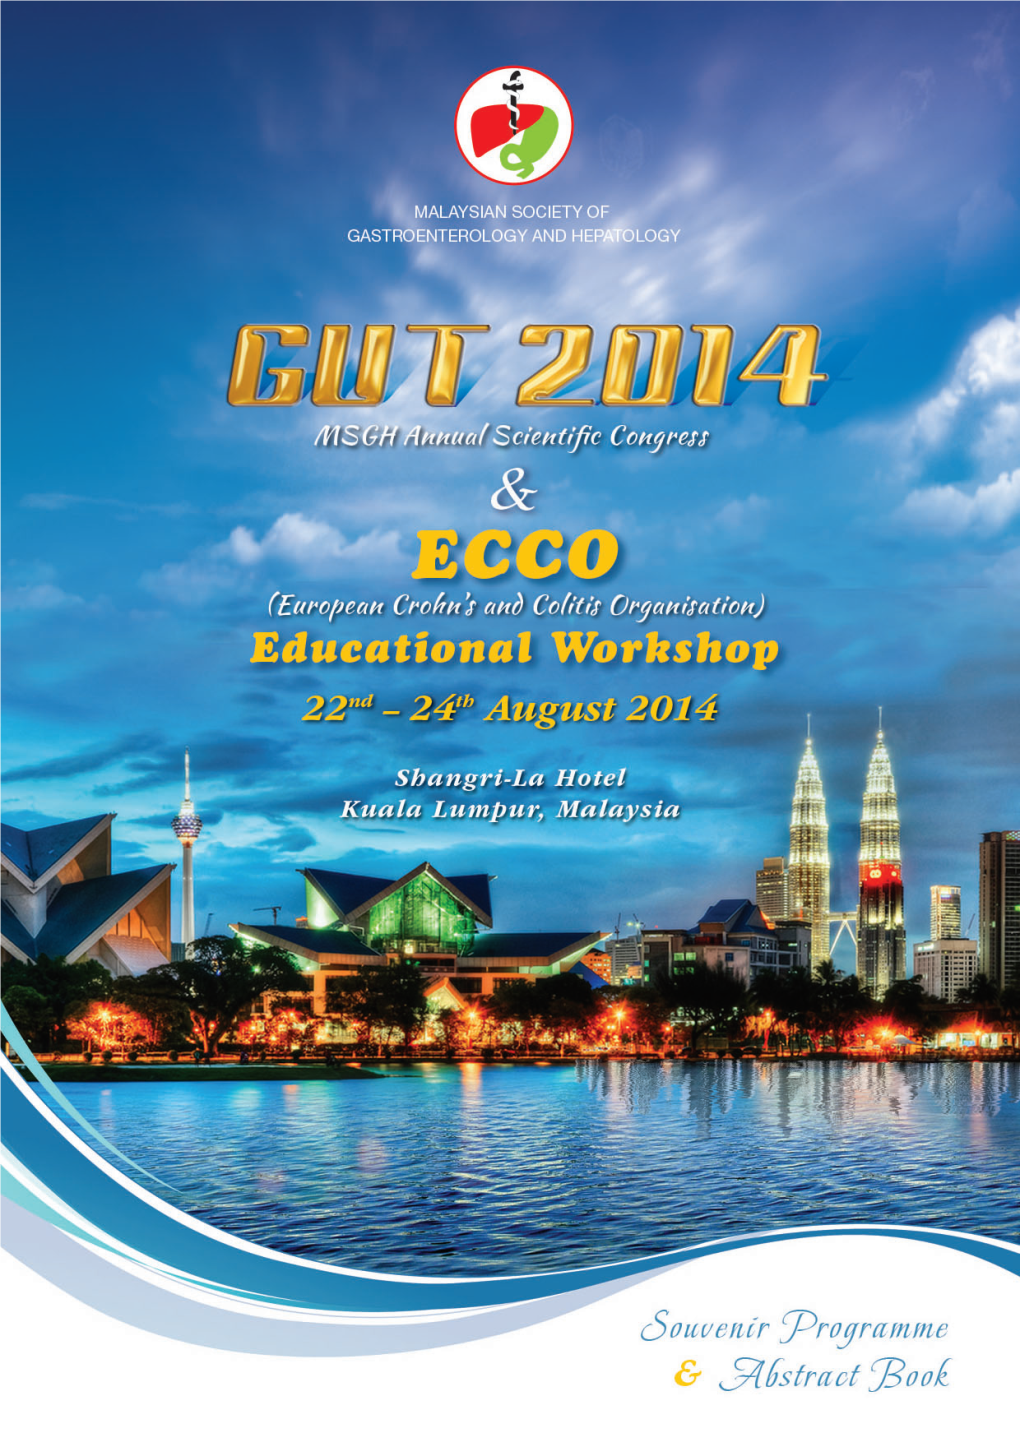 MSGH Annual Scientific Meetings and Endoscopy Workshops 16 – 22